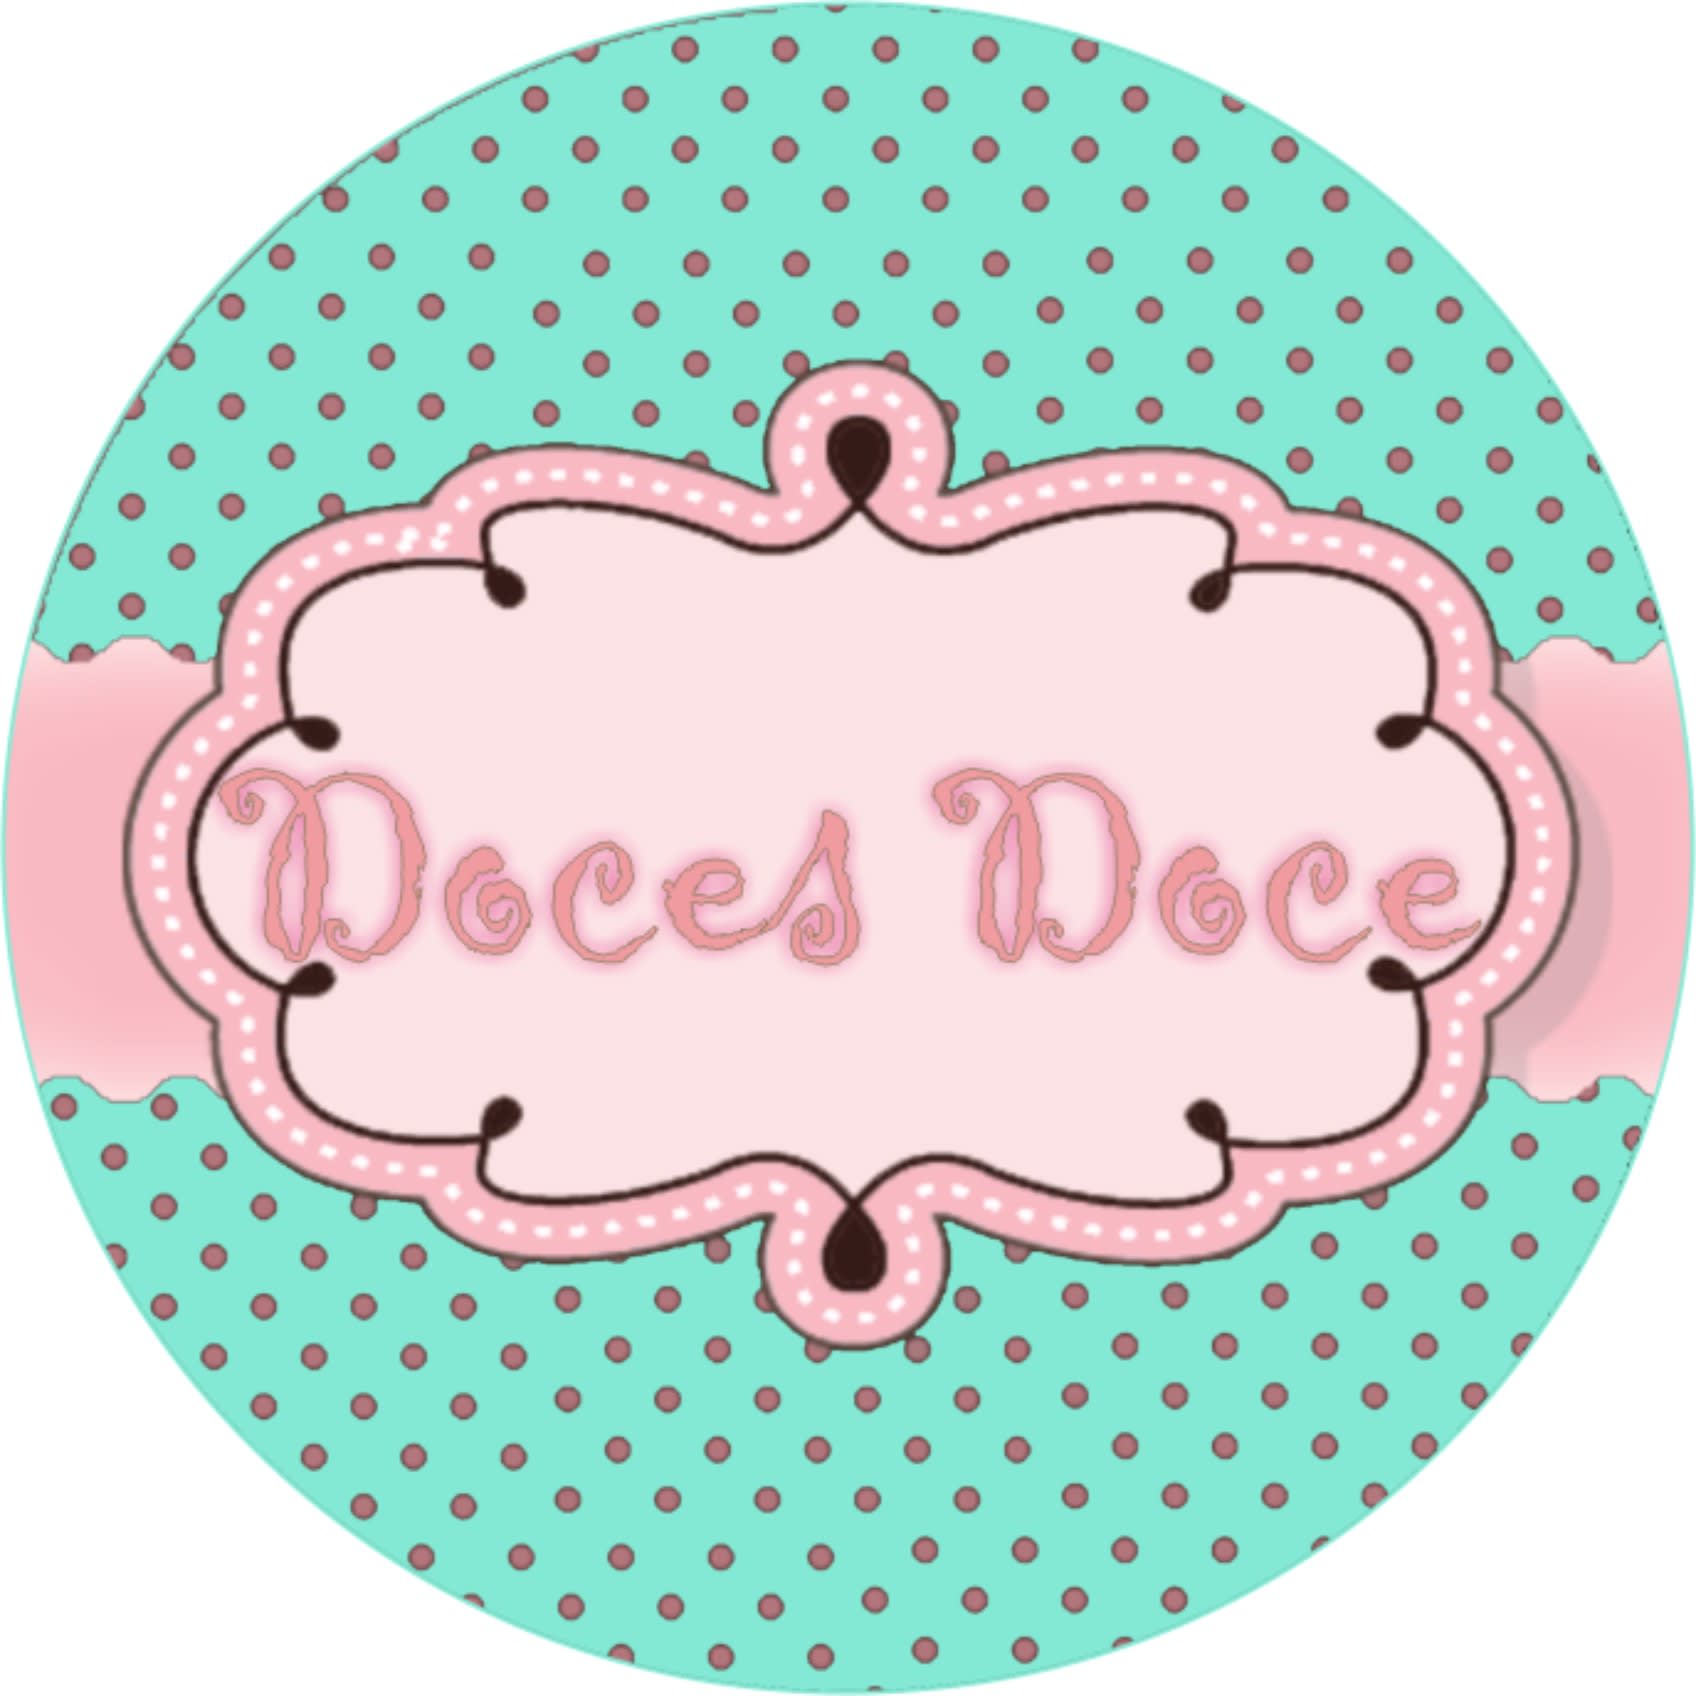 Doces Doce